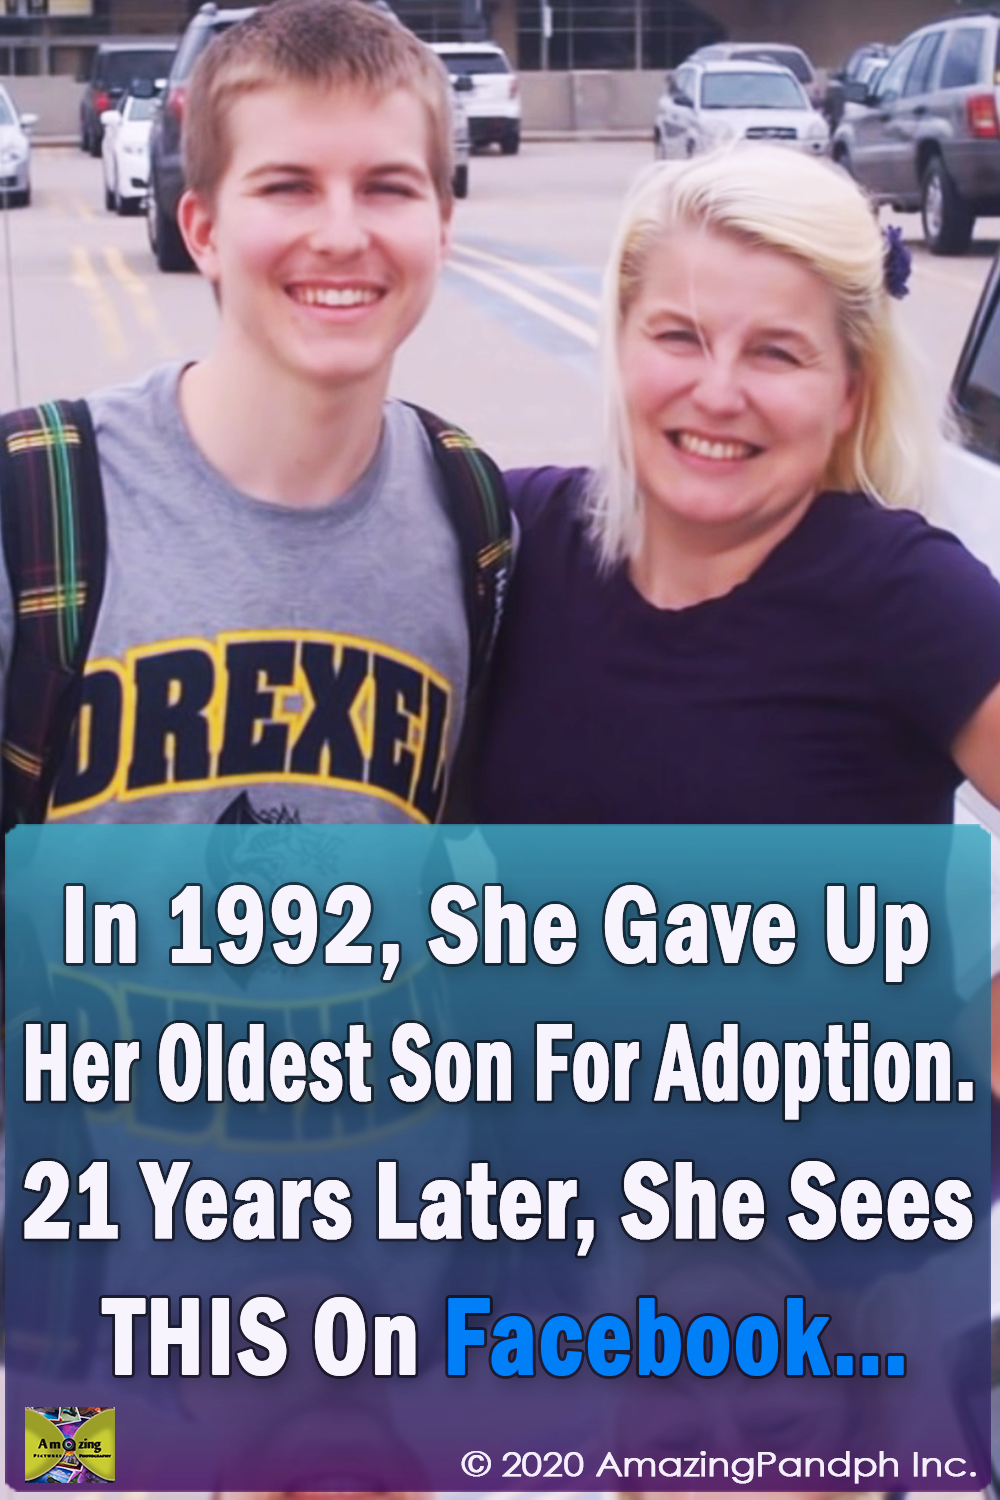 Old Son, Adoption, Adopted, Son, give Up, mother, touching, story, tears, sad,